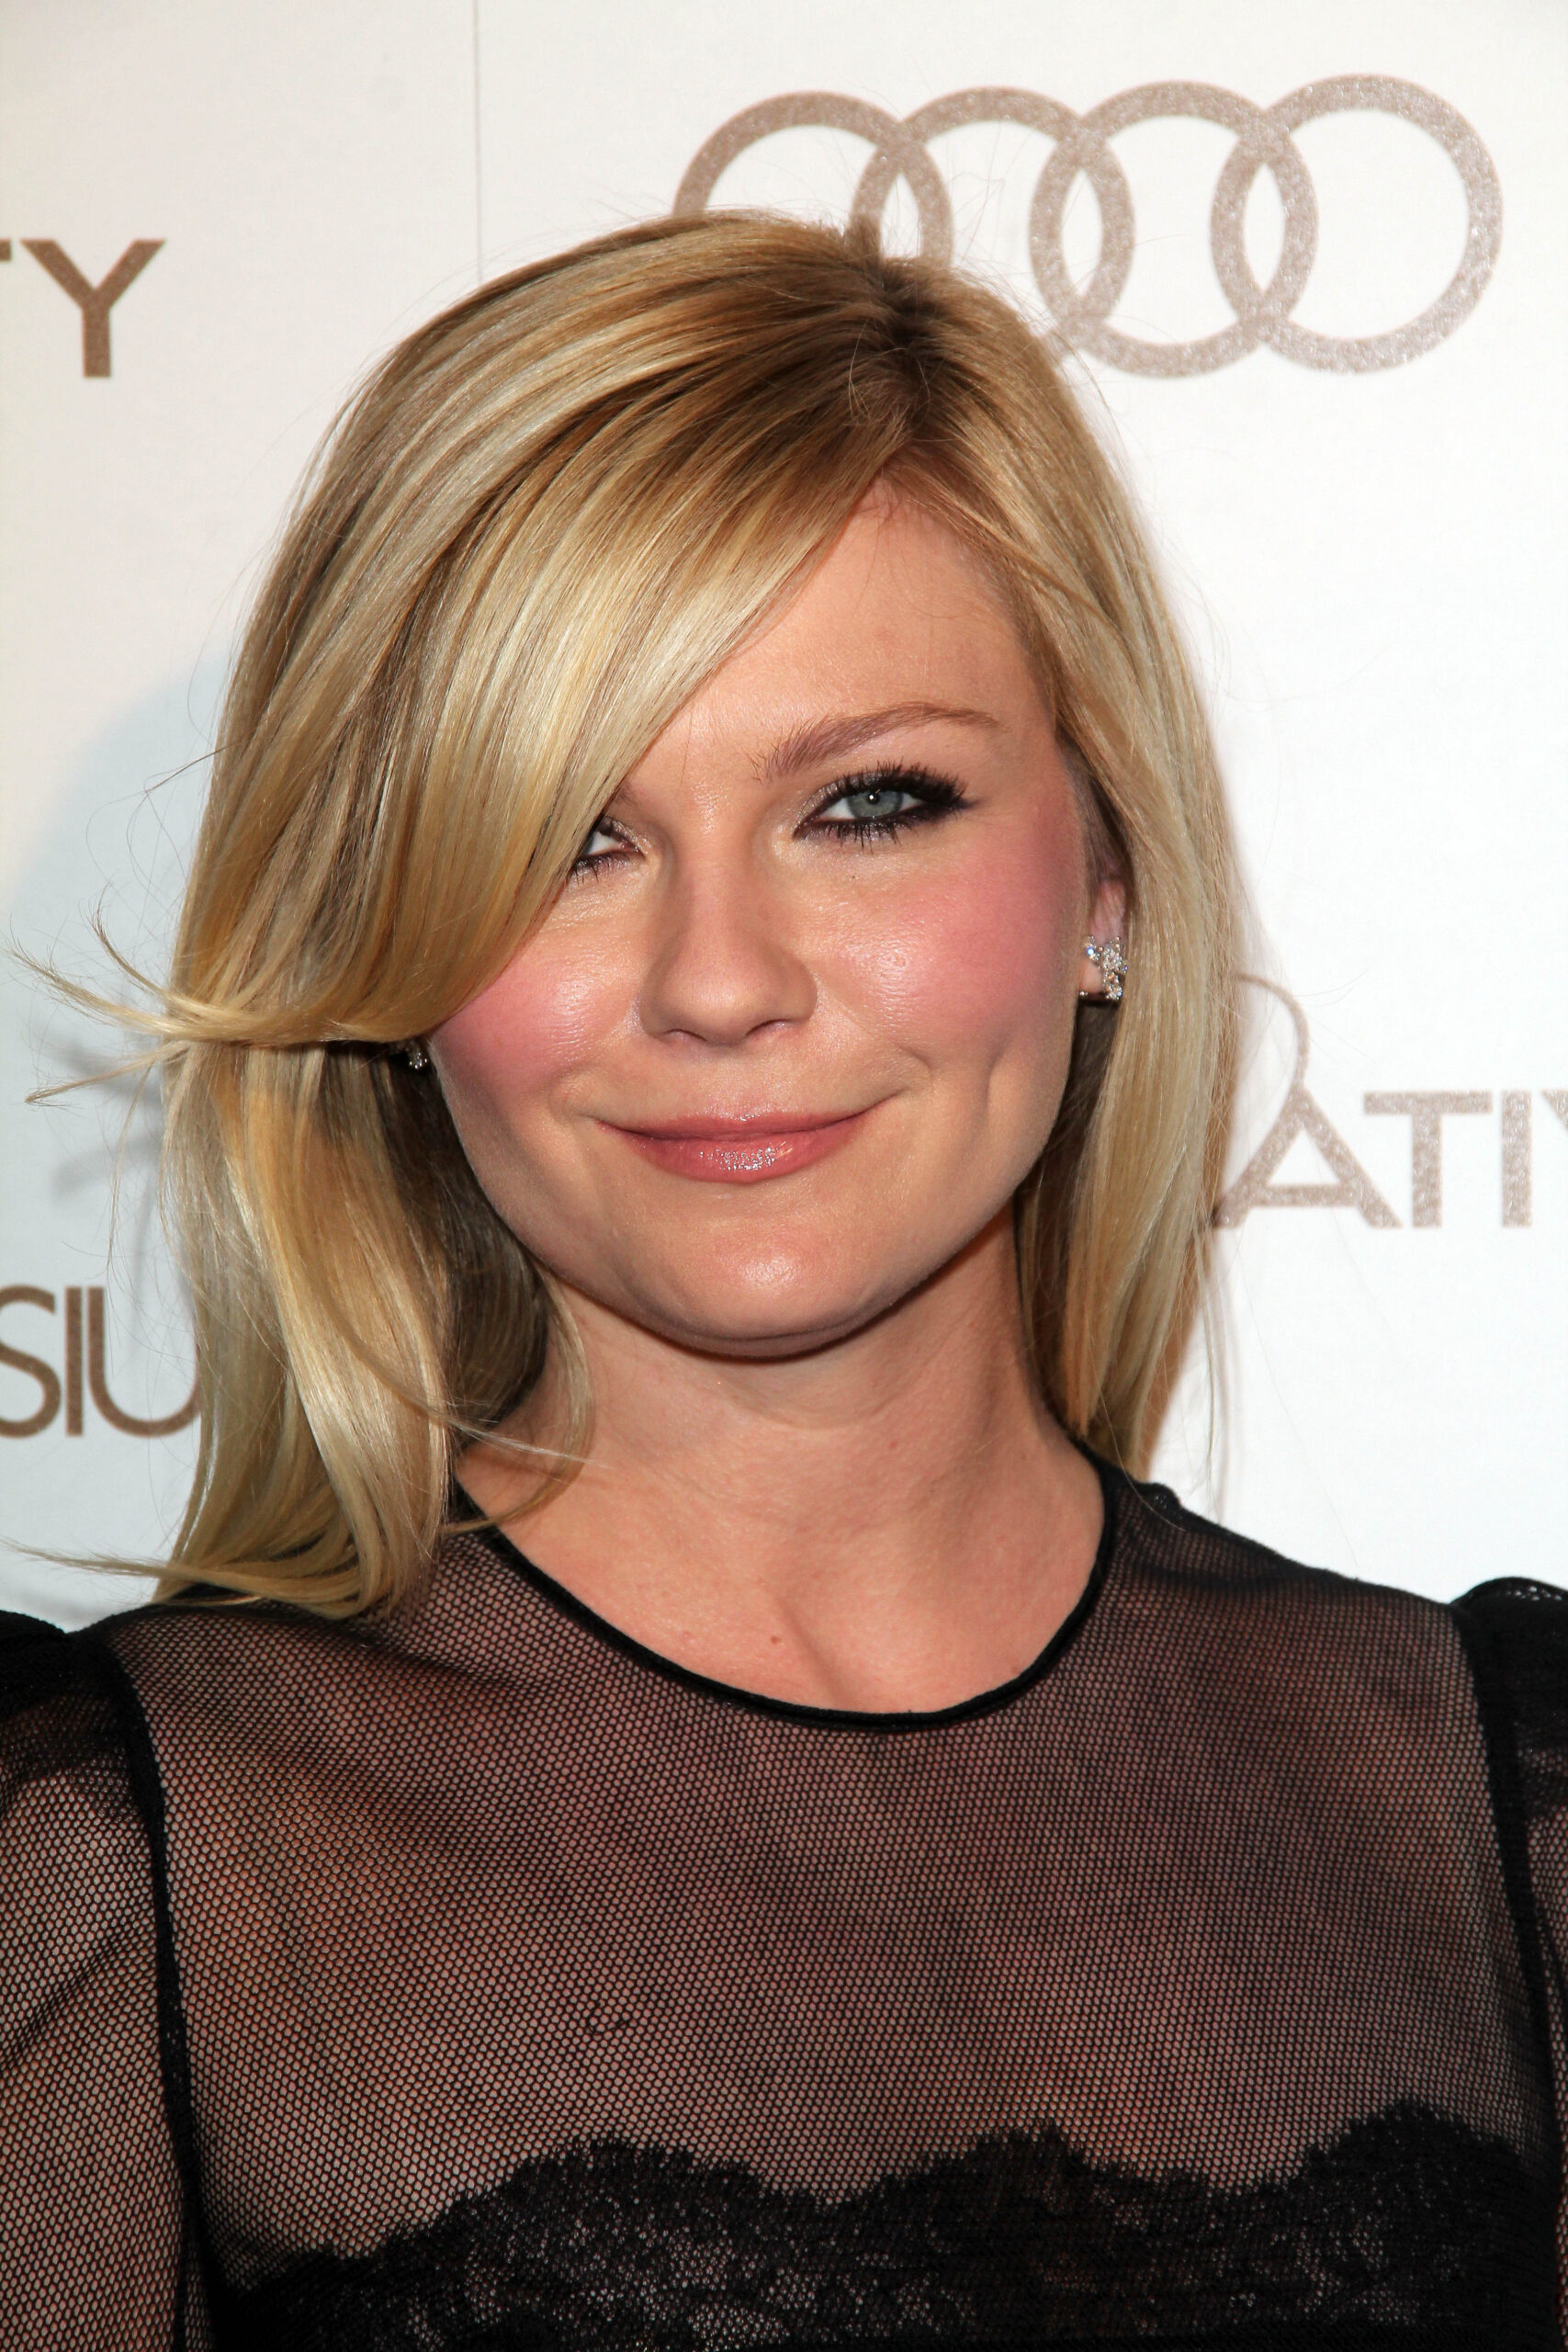 This Is How Kirsten Dunst's Hairstylist Creates an “It” Cut | Hairstyle,  Beauty, Hair cuts